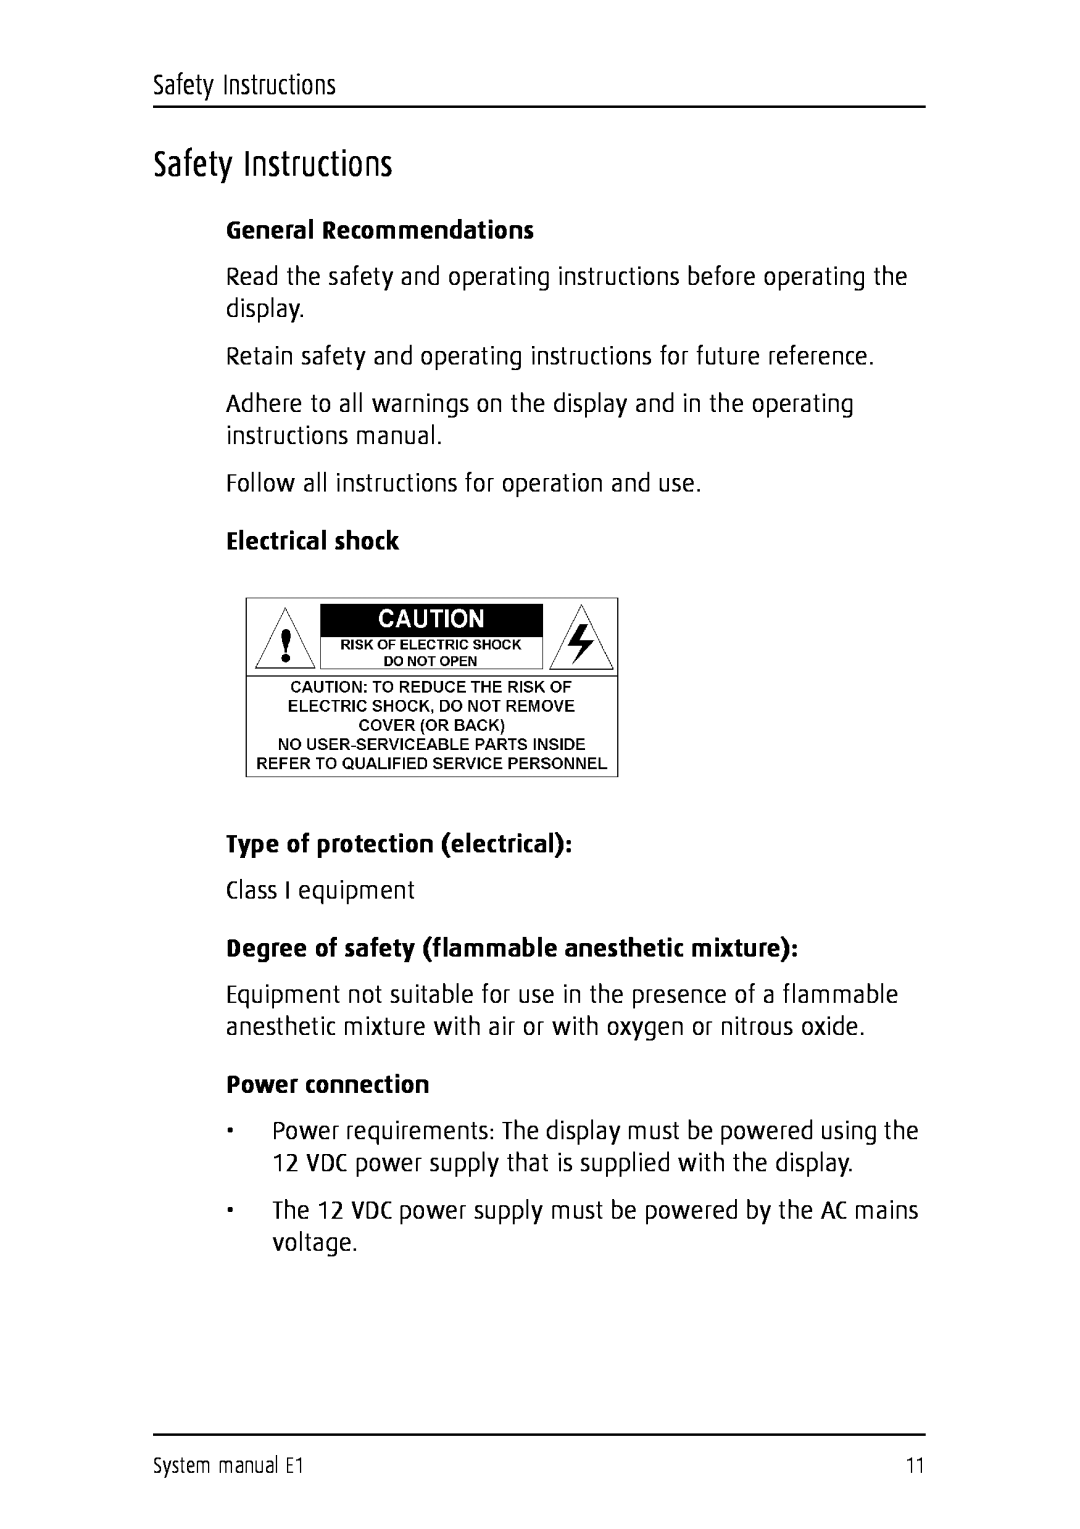 Barco E1 Safety Instructions, General Recommendations, Electrical shock Type of protection electrical, Power connection 